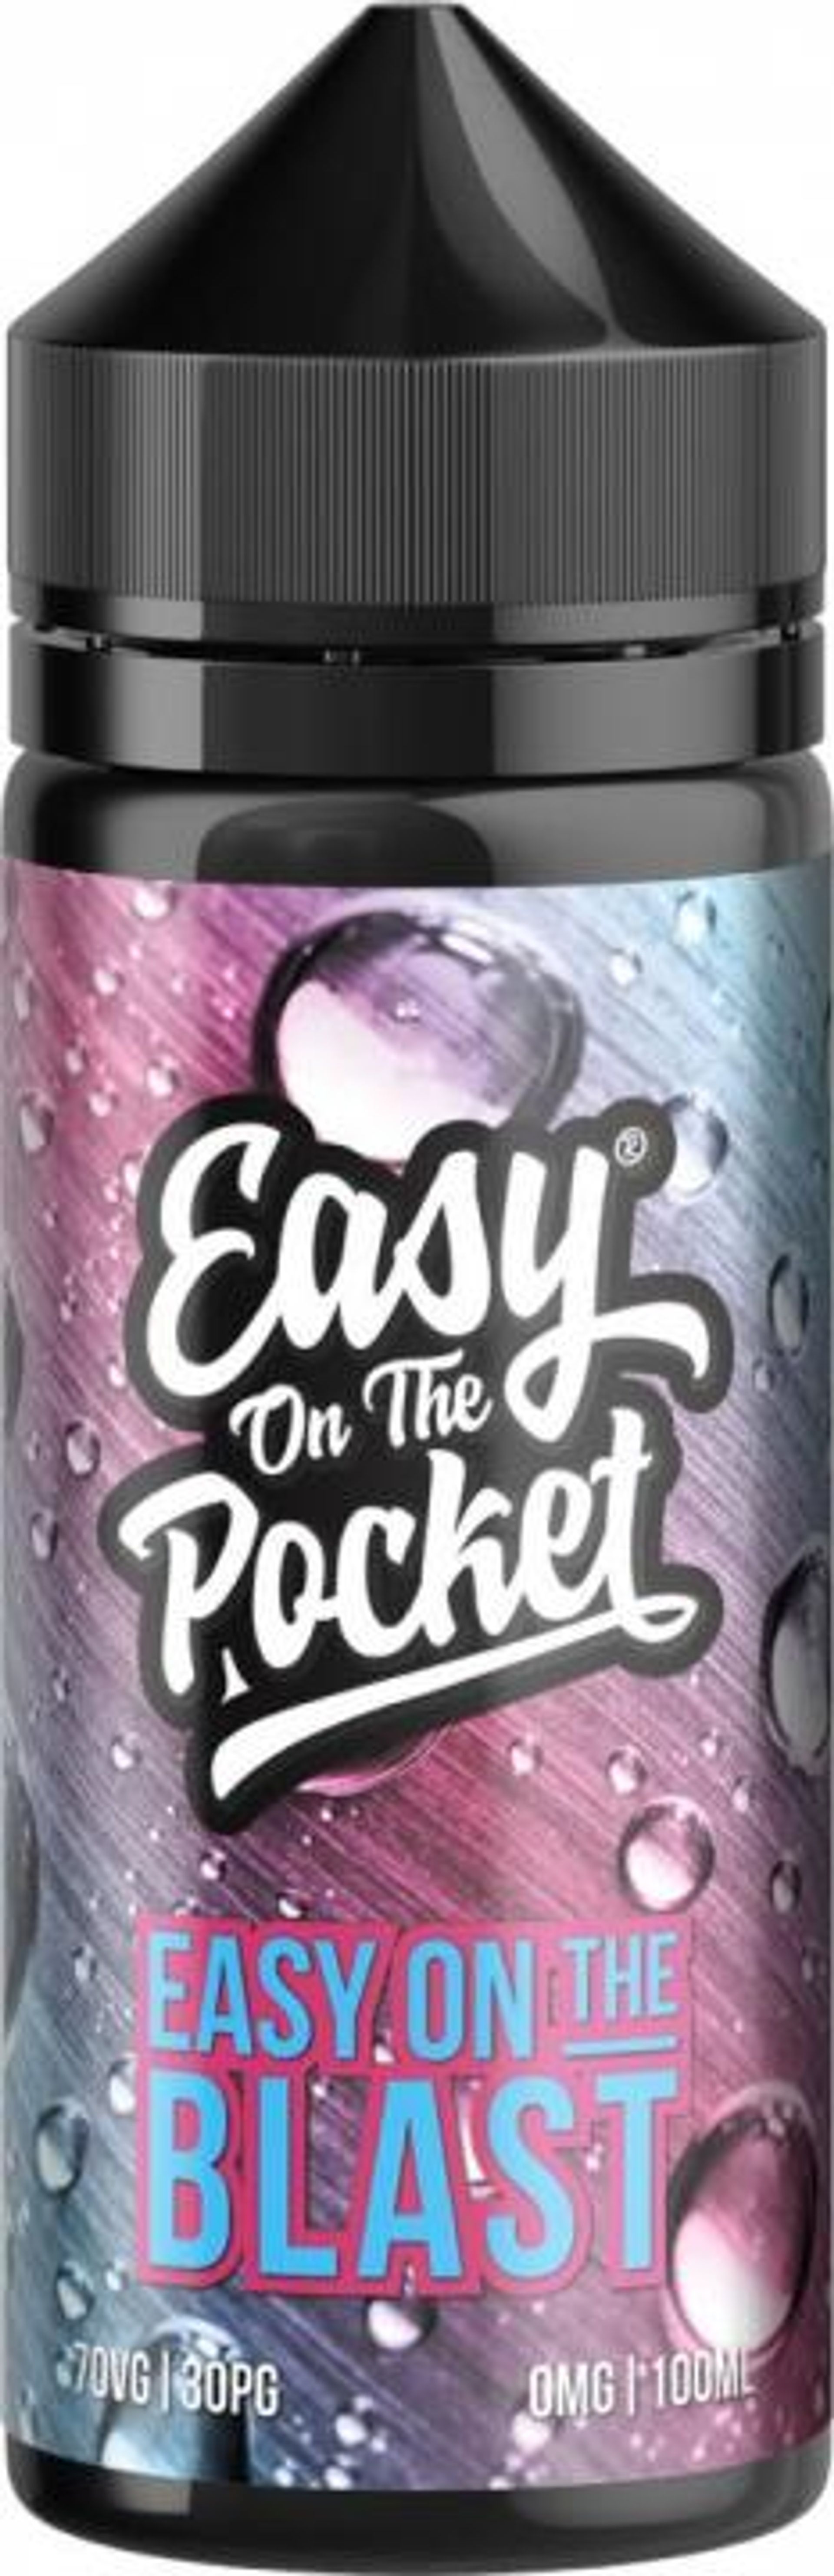 Image of Easy On The Blast by Easy On The Pocket